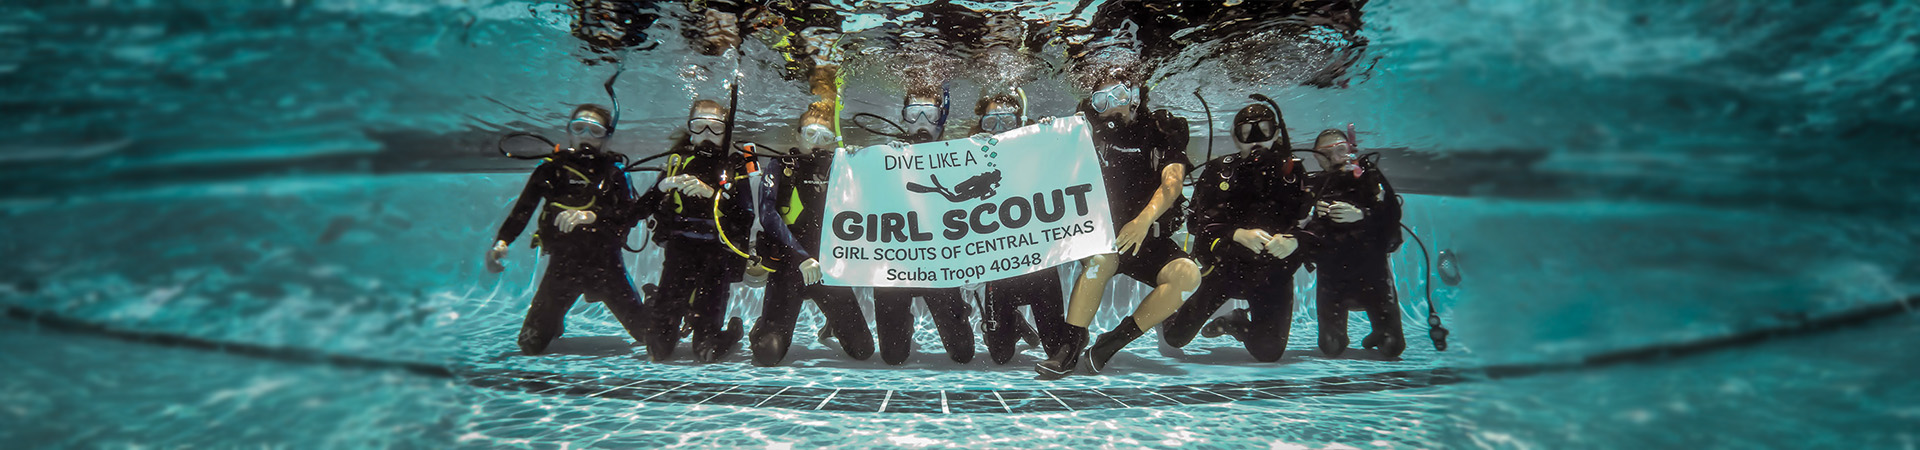  The Nation’s First Scuba Troop Takes Girl Scouting to New Depths. 